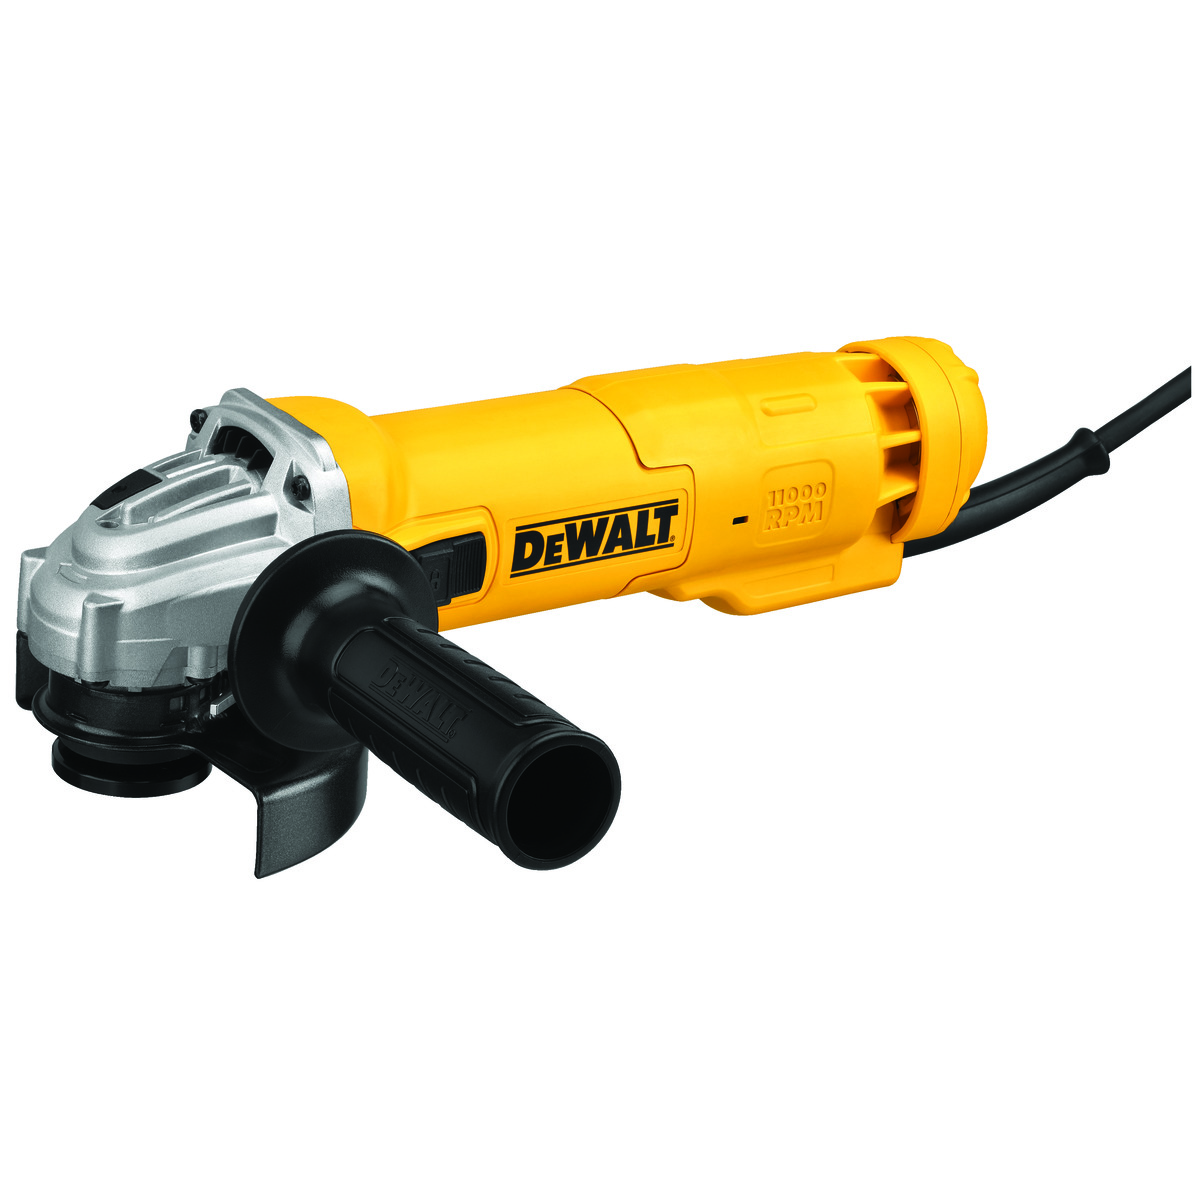 DeWALT® DWE4214 Low Profile Small Electric Angle Grinder, 4-1/2 in Dia  Wheel, 5/8-11 UNC Arbor/Shank, 120 VAC, For Wheel: Quick-Change™,  Black/Yellow, Lock-On Slide Switch